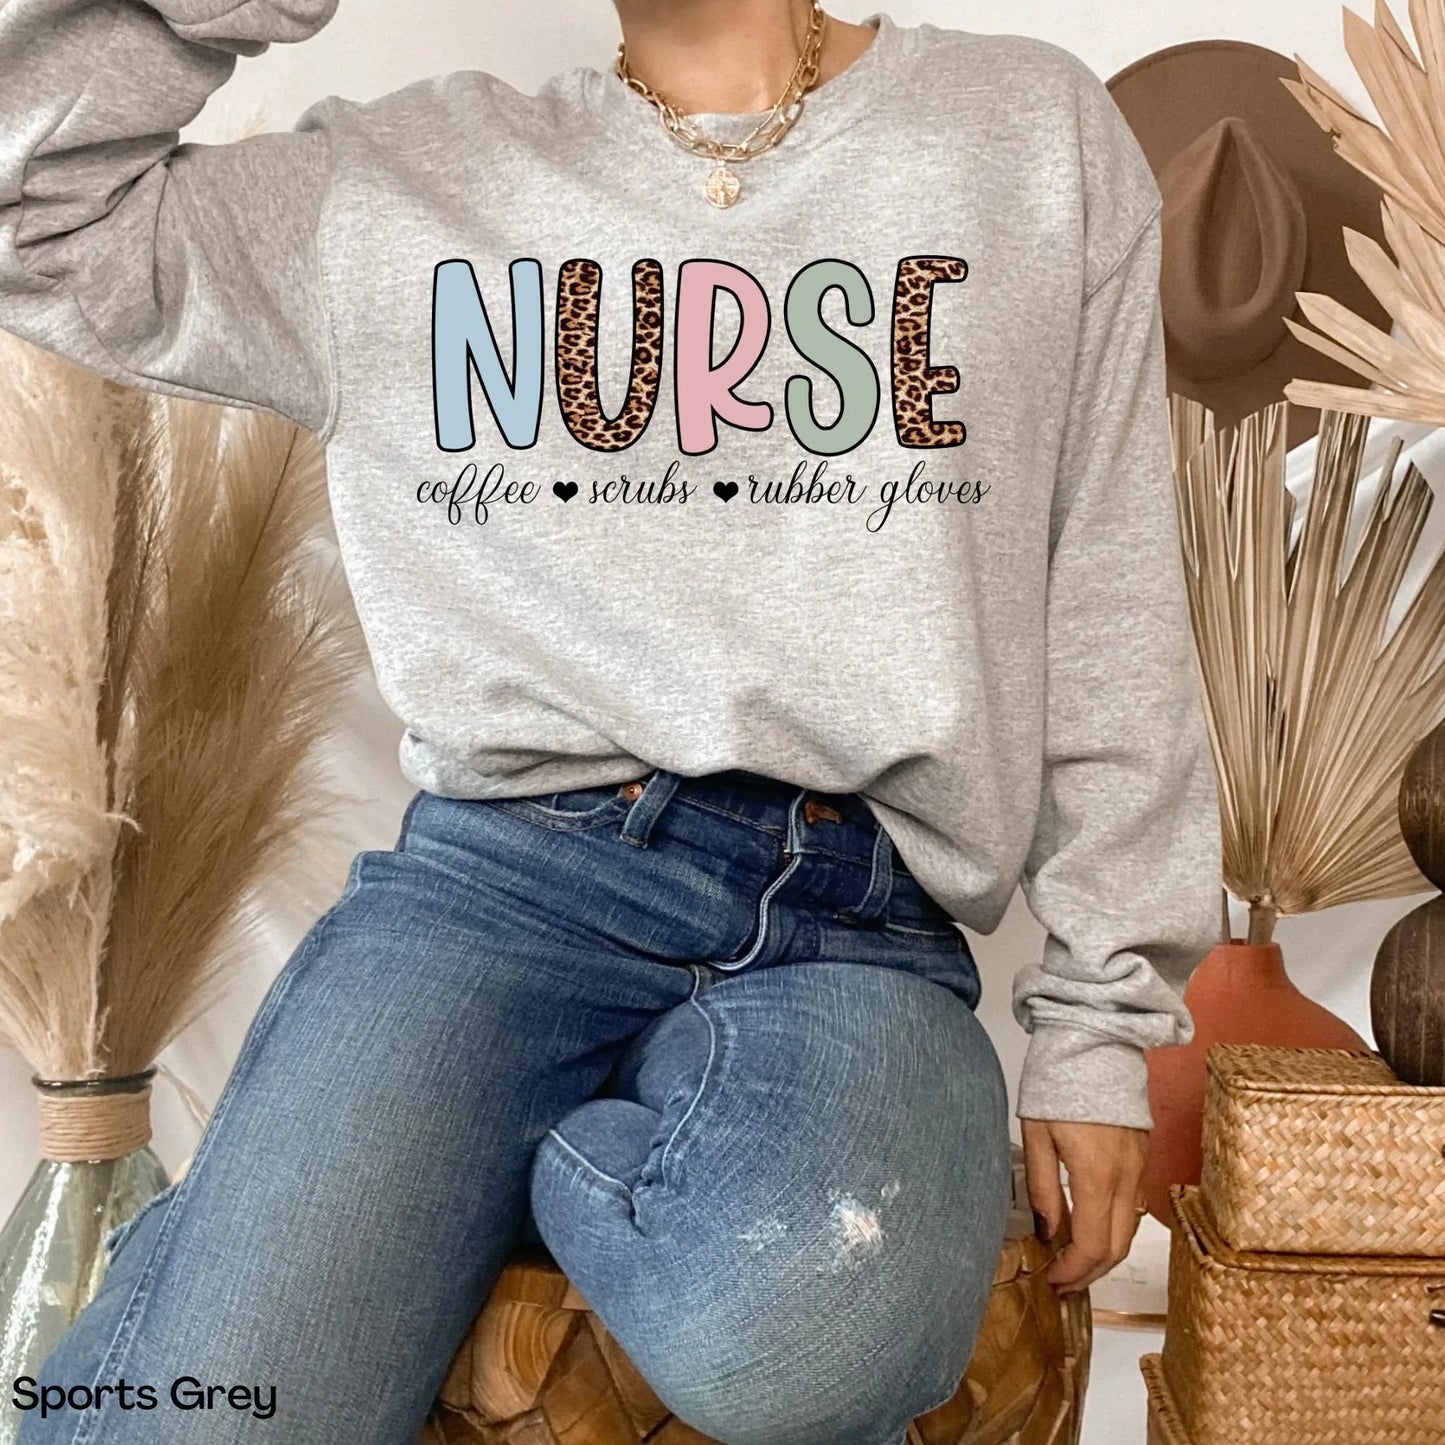 Funny Nurse Shirt | Great for Students, Practitioners, New Grads, Coffee Lovers, Pediatric, ER, L&D, Retired, Nurse Week Appreciation Gift HMDesignStudioUS